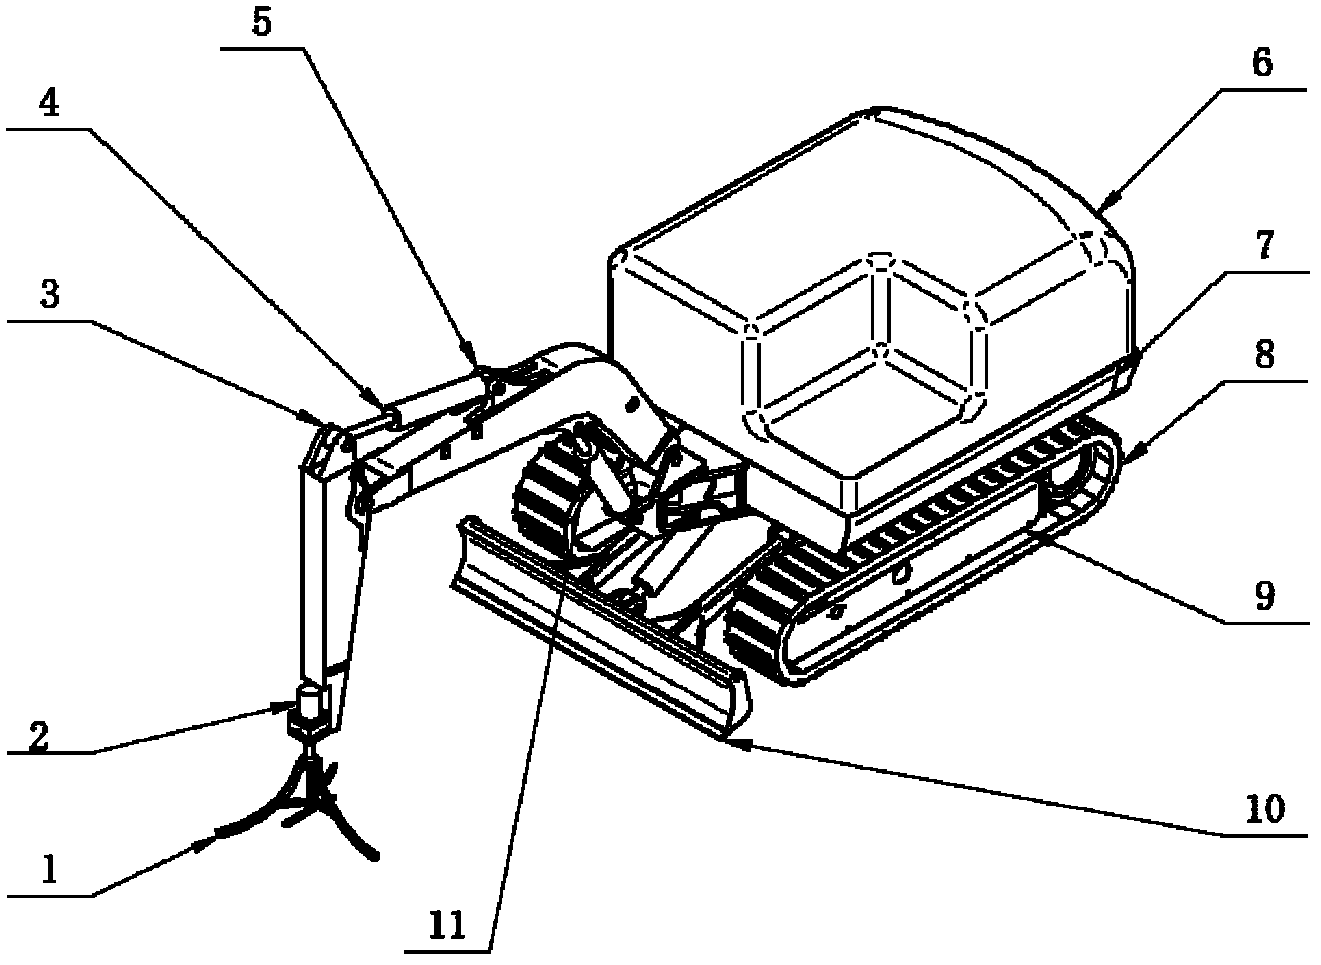 Self-stirring type dredging device for river channels